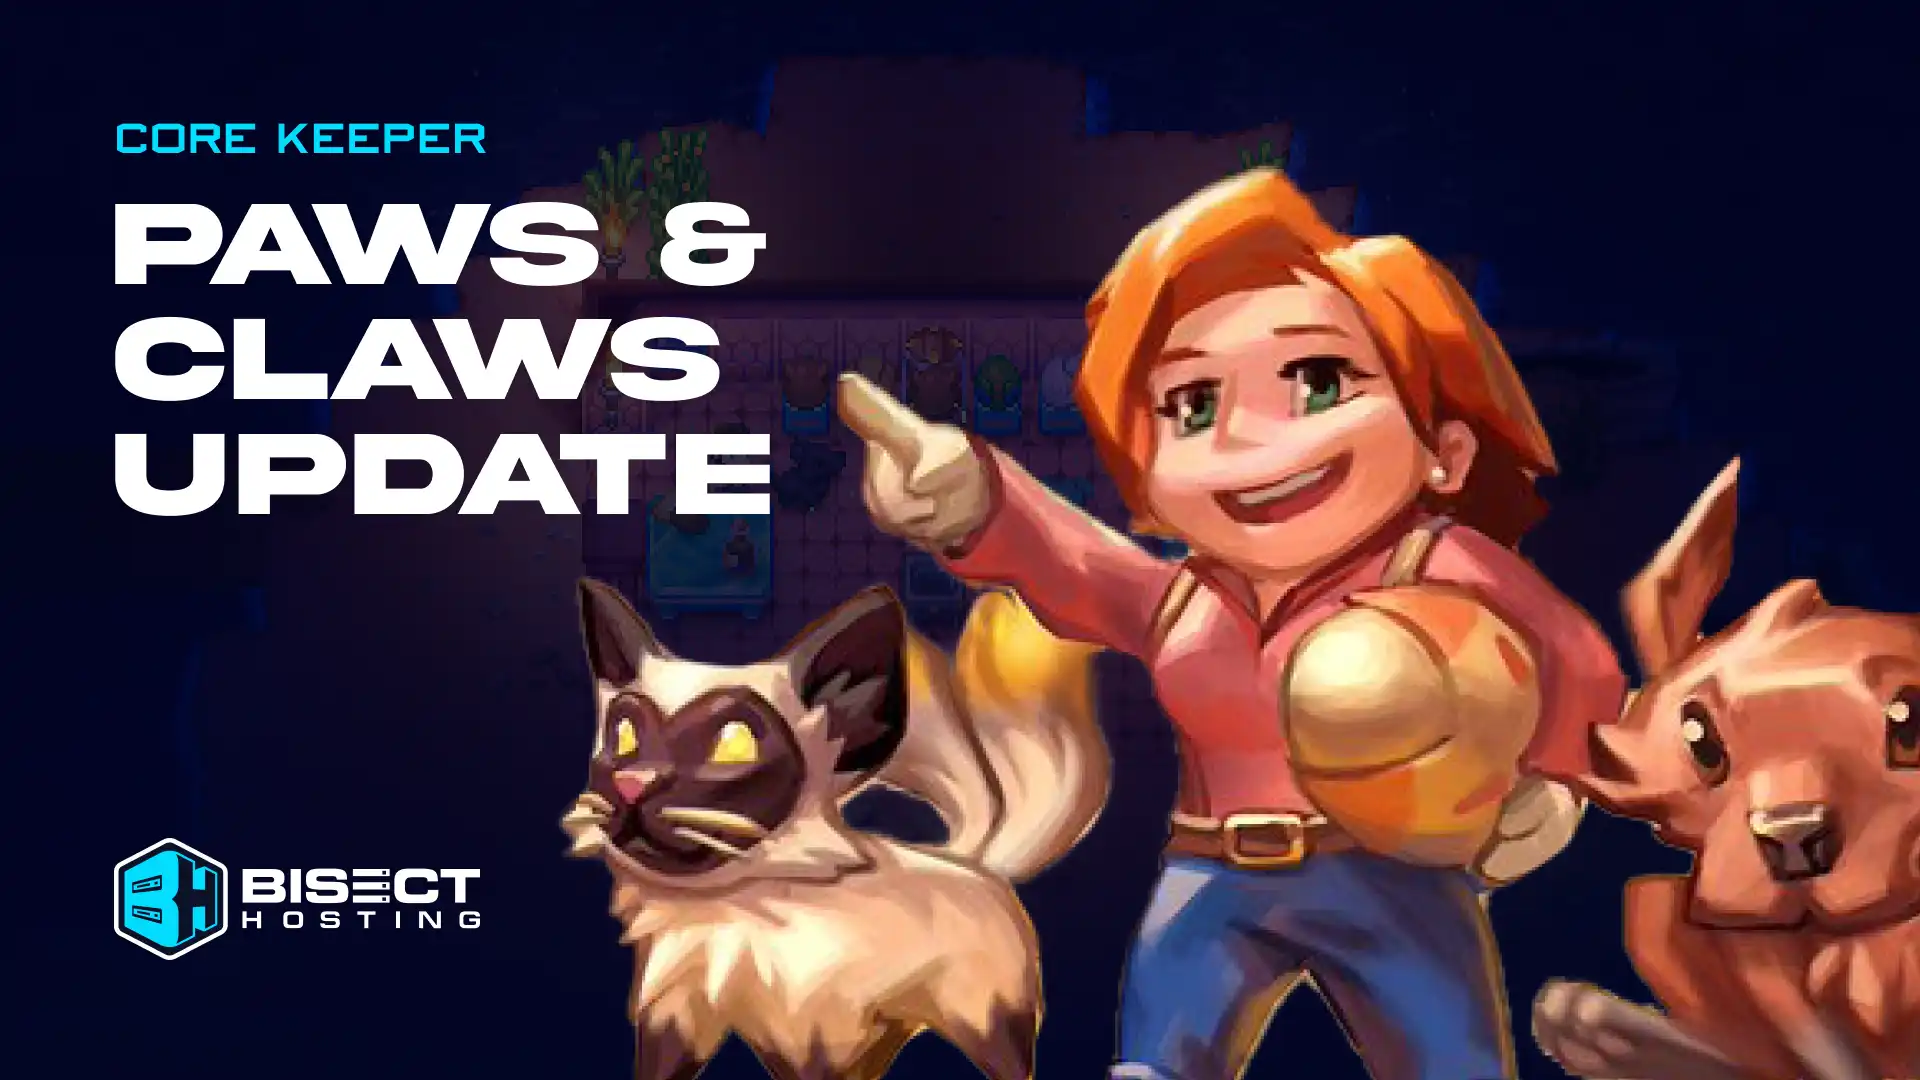 Core Keeper Paws & Claws Update: Patch Notes & All Changes